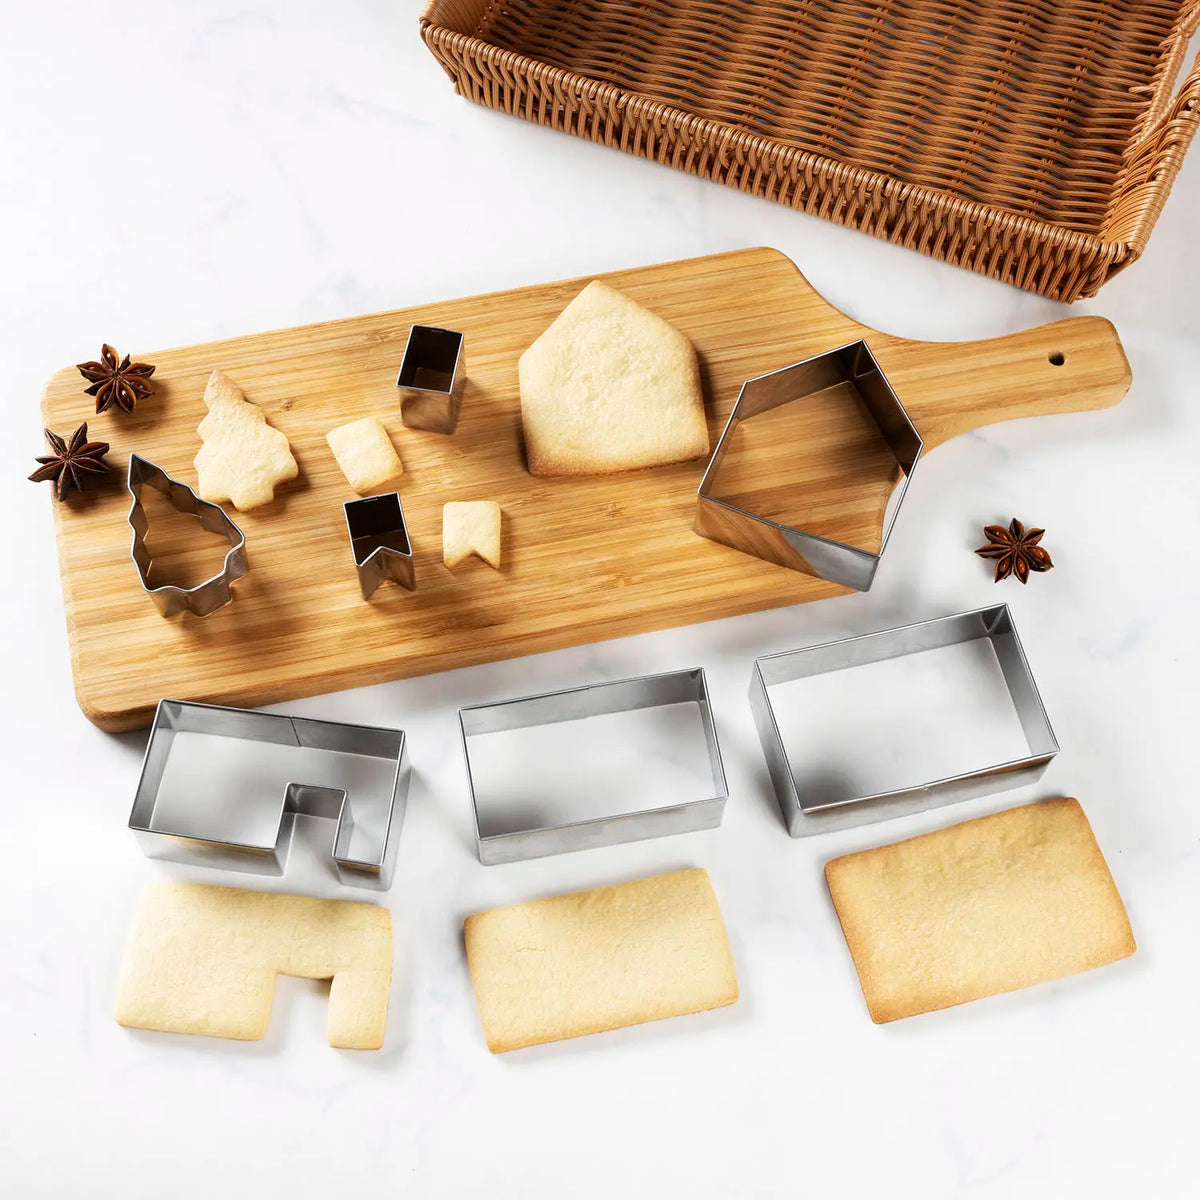 TIGERCROWN Cake Land Stainless Steel Bench Scraper with Scale -  Globalkitchen Japan